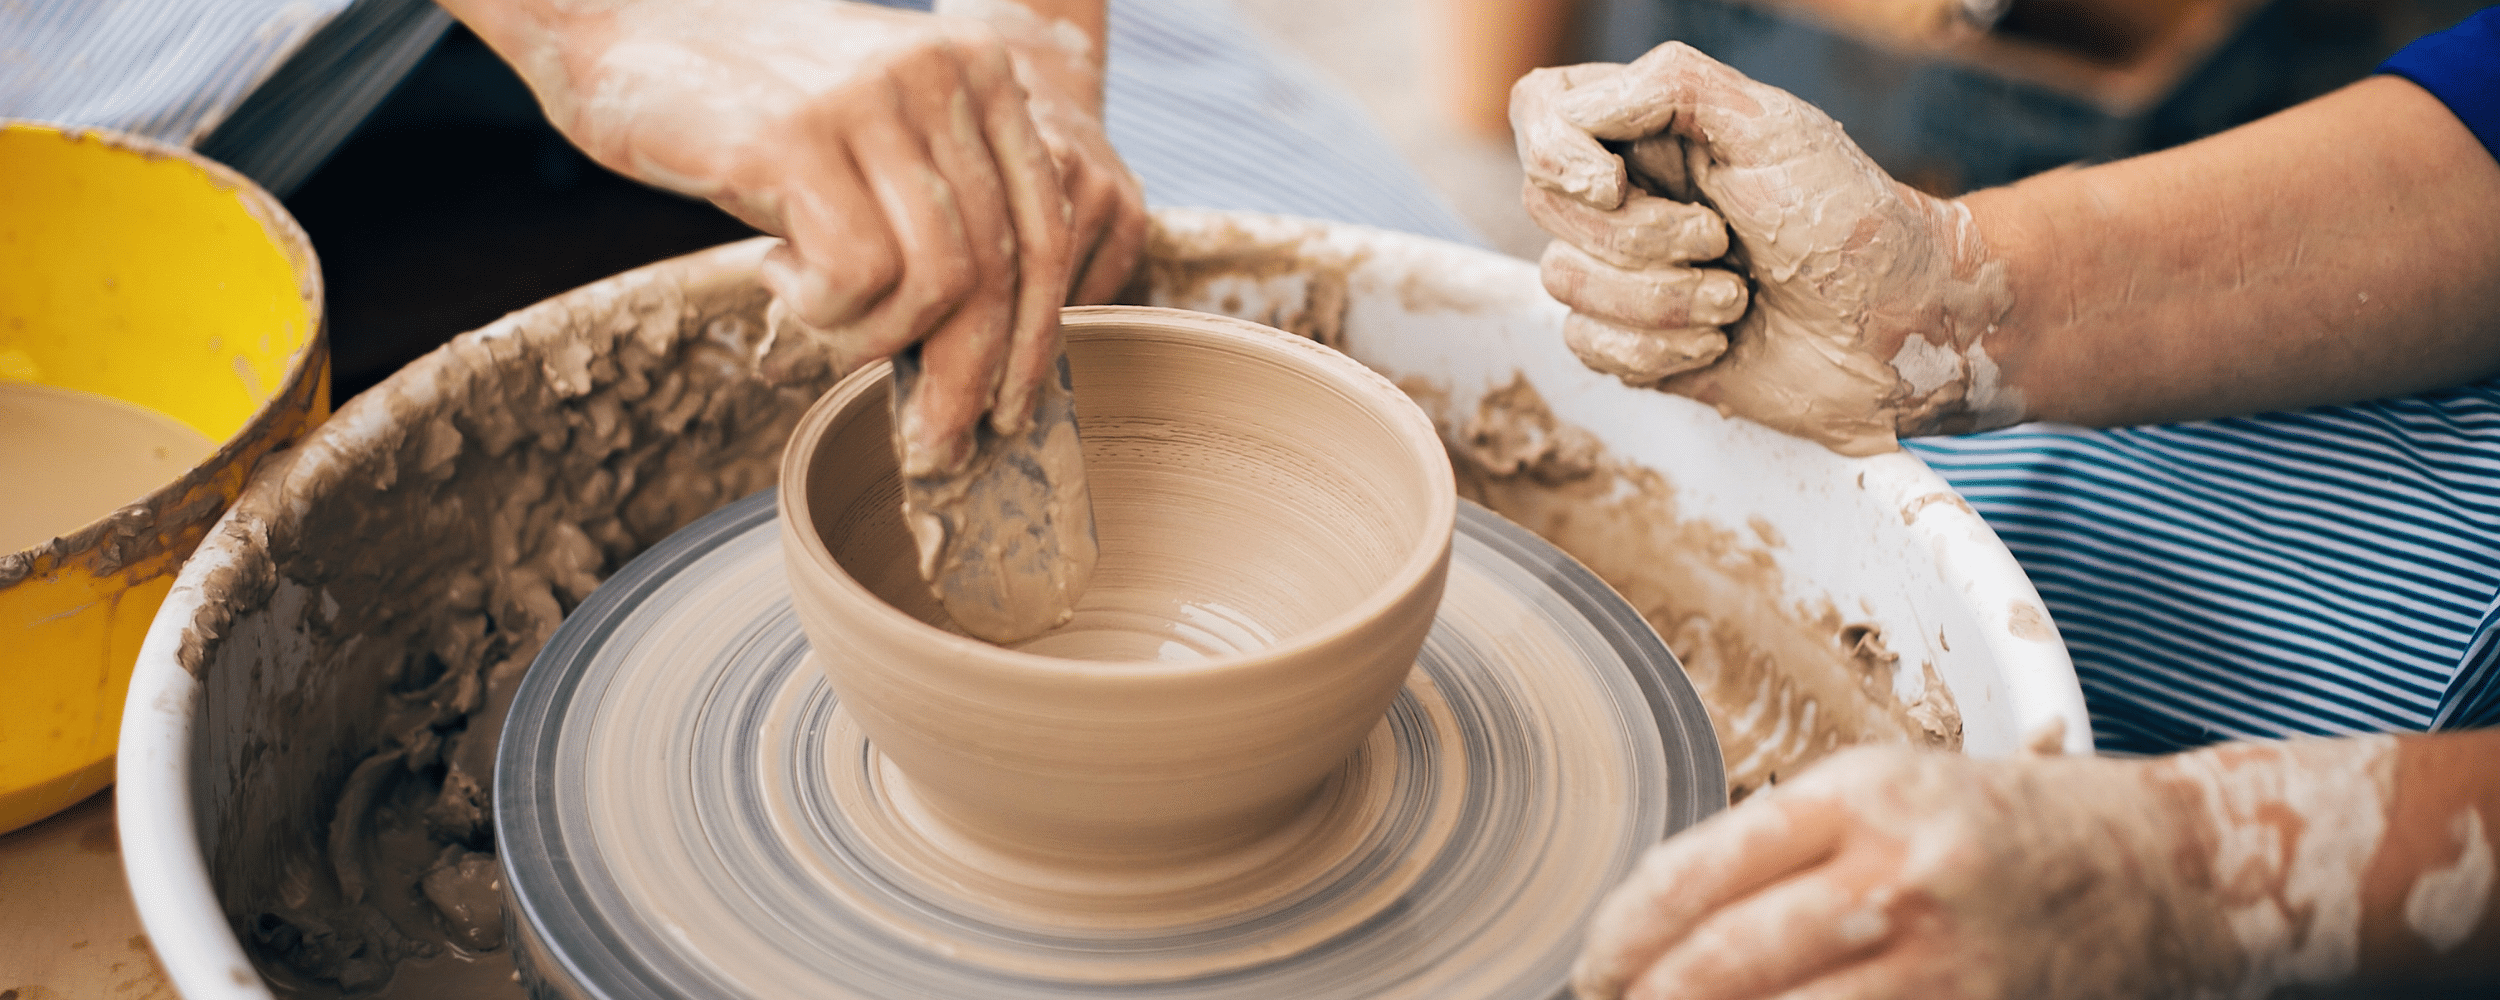 local artisans involved in pottery making at the craft village